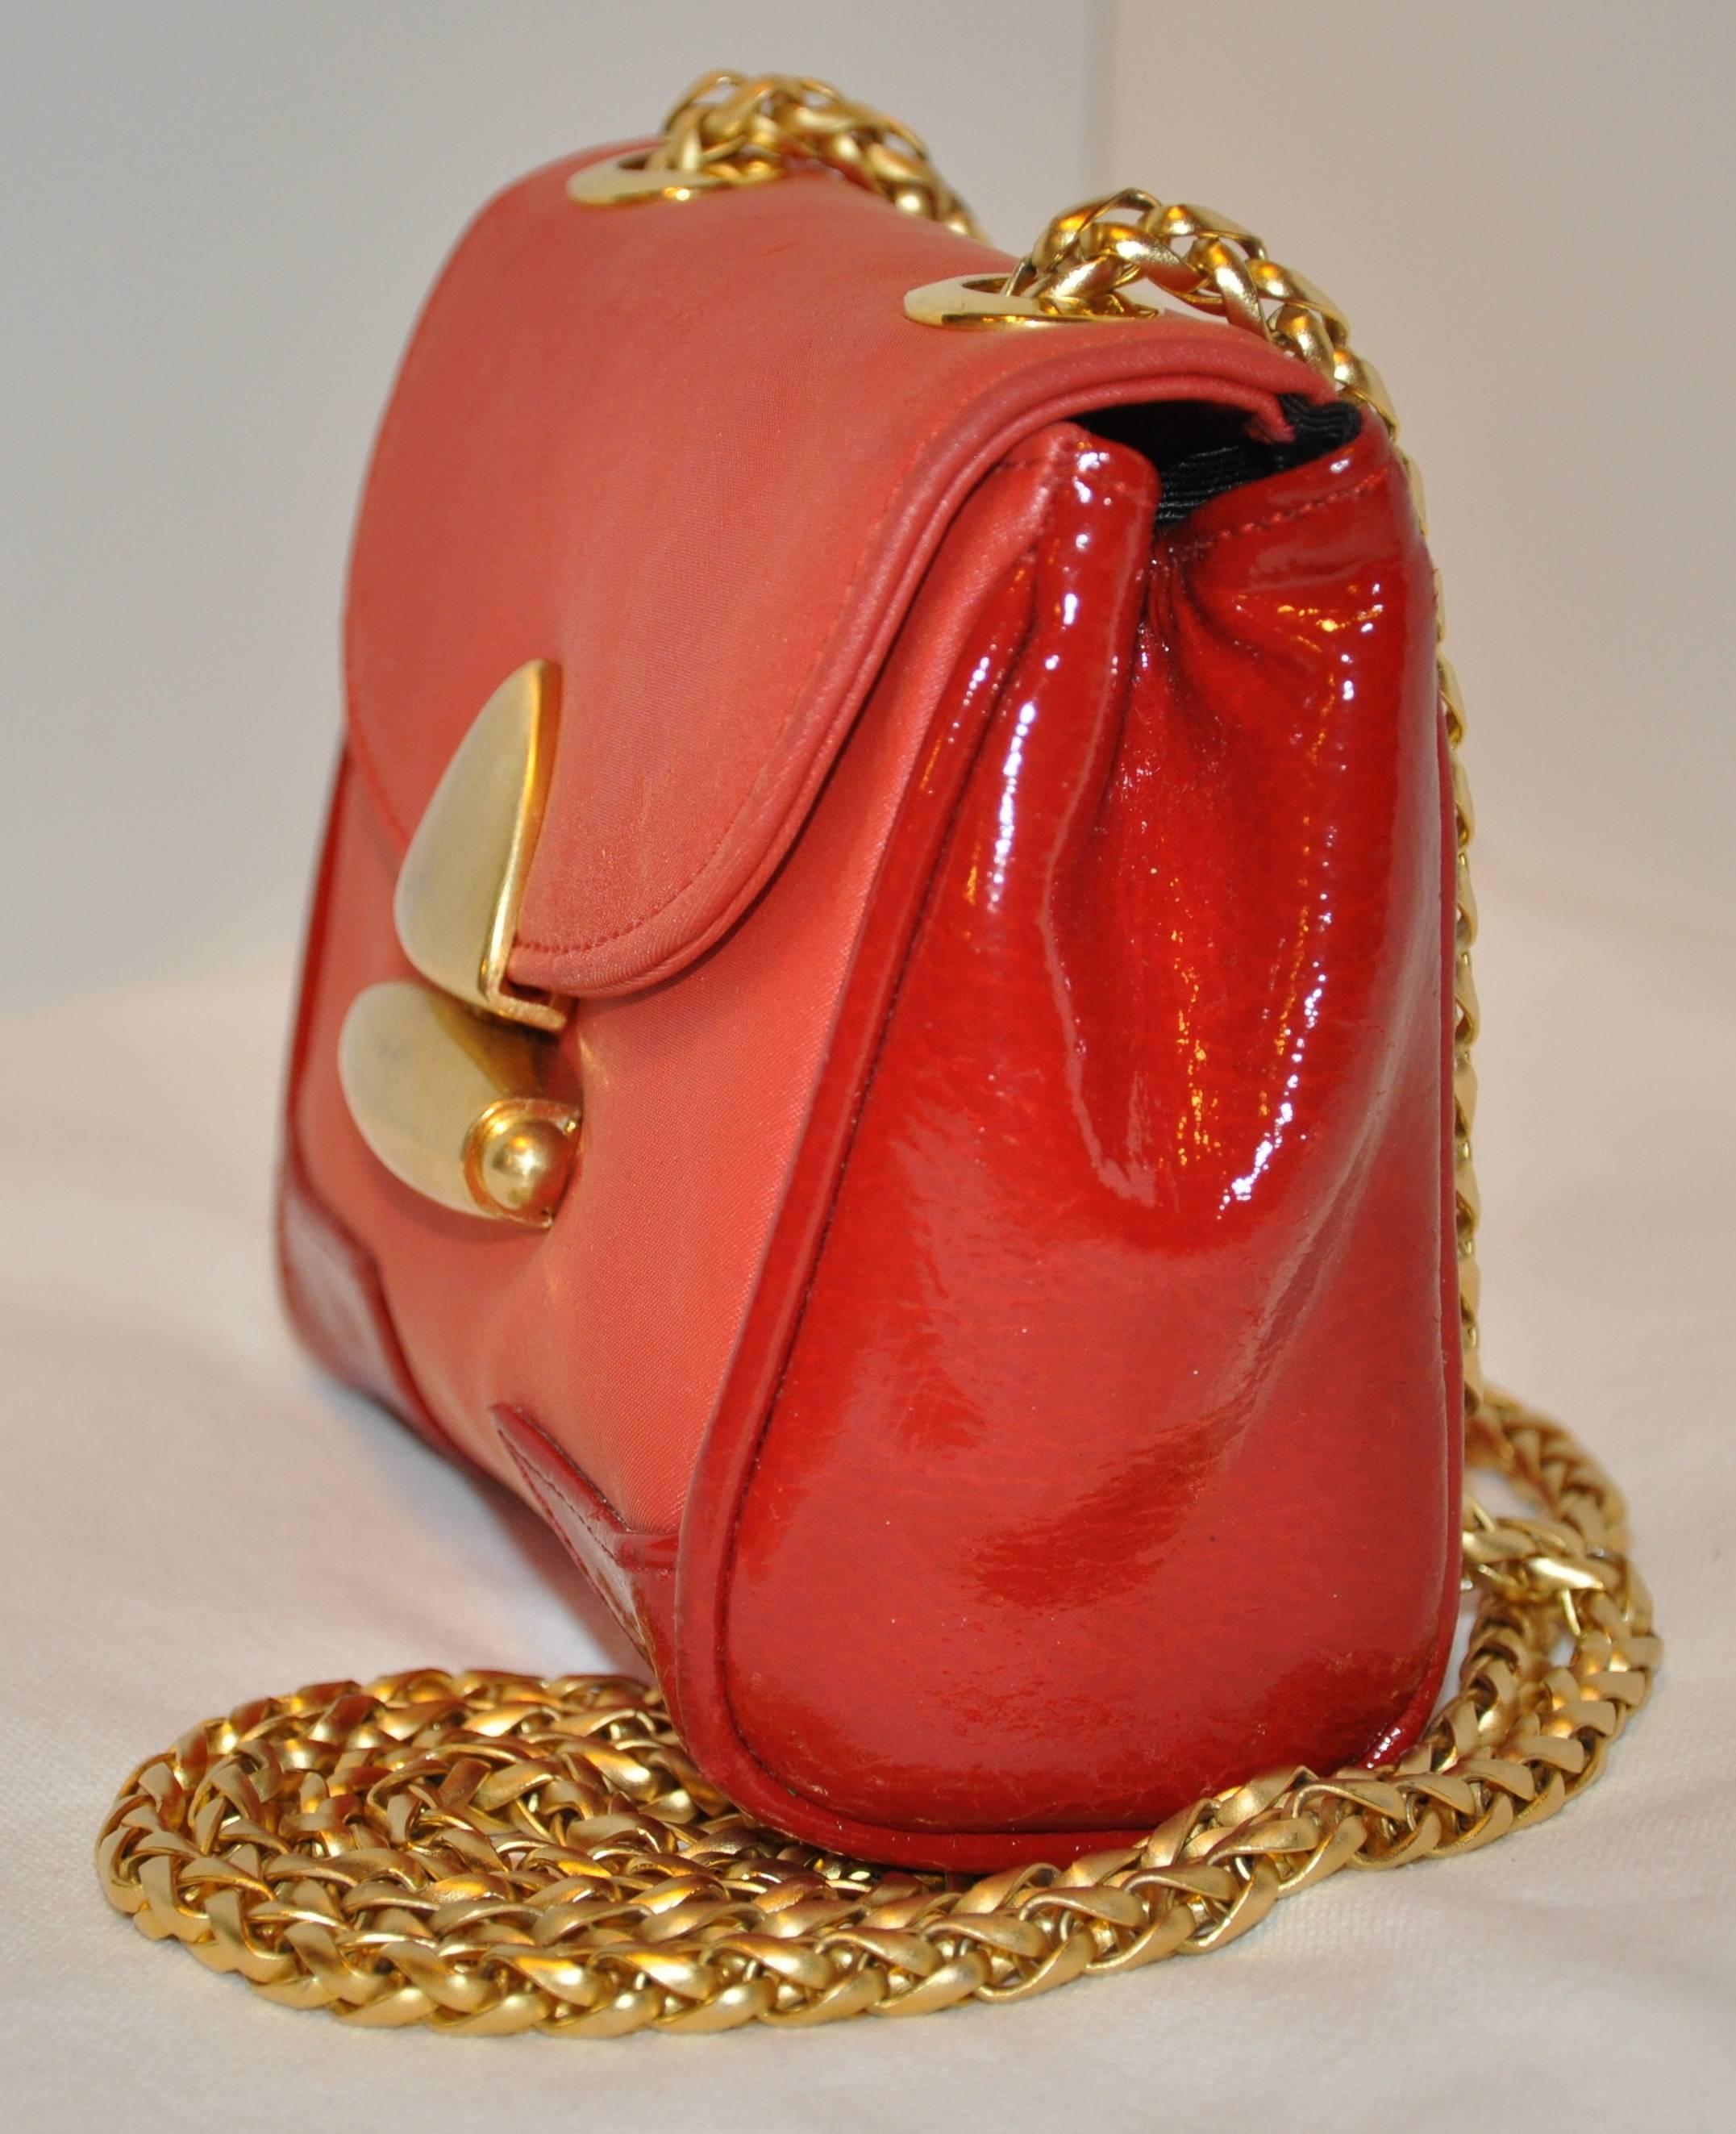        MCM wonderfully detailed miniature red with red patent leather calfskin accents evening shoulder bag is completed with gilded gold hardware on the clasp opening as well as the detailed woven thick gilded gold shoulder straps. The shoulder